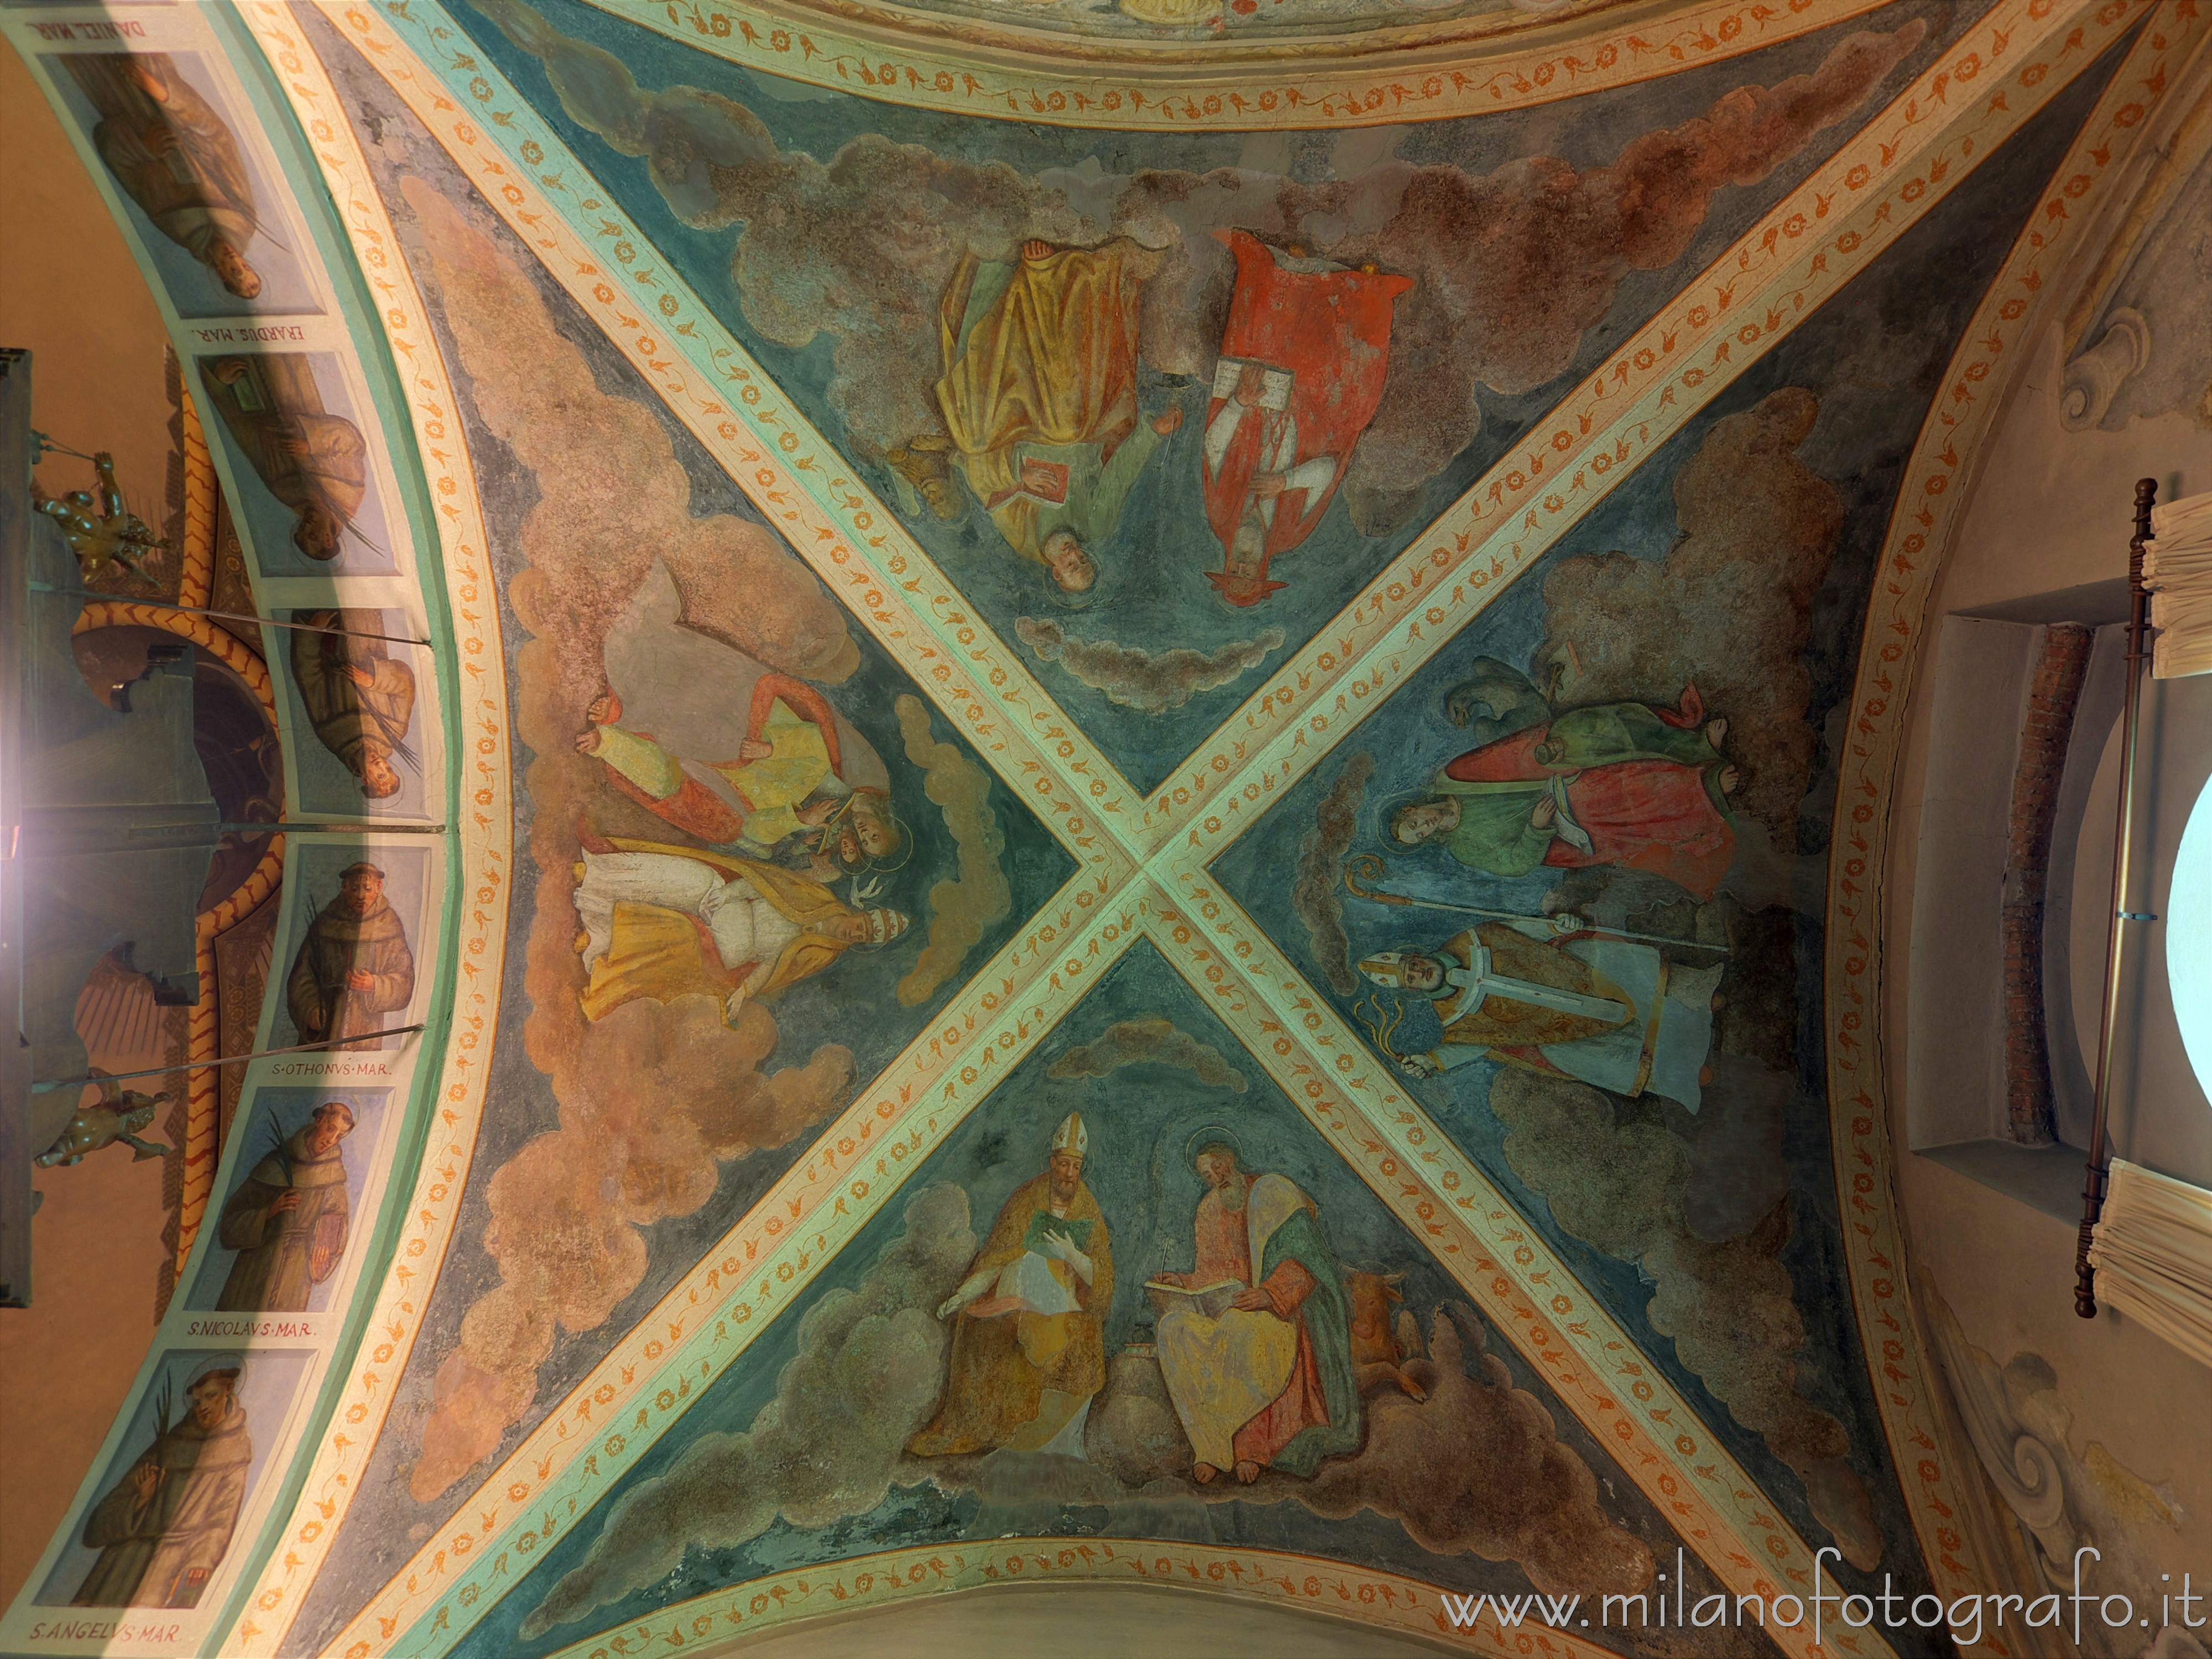 Merate (Lecco, Italy): Ceiling of the apse of the church of the Convent of Sabbioncello - Merate (Lecco, Italy)